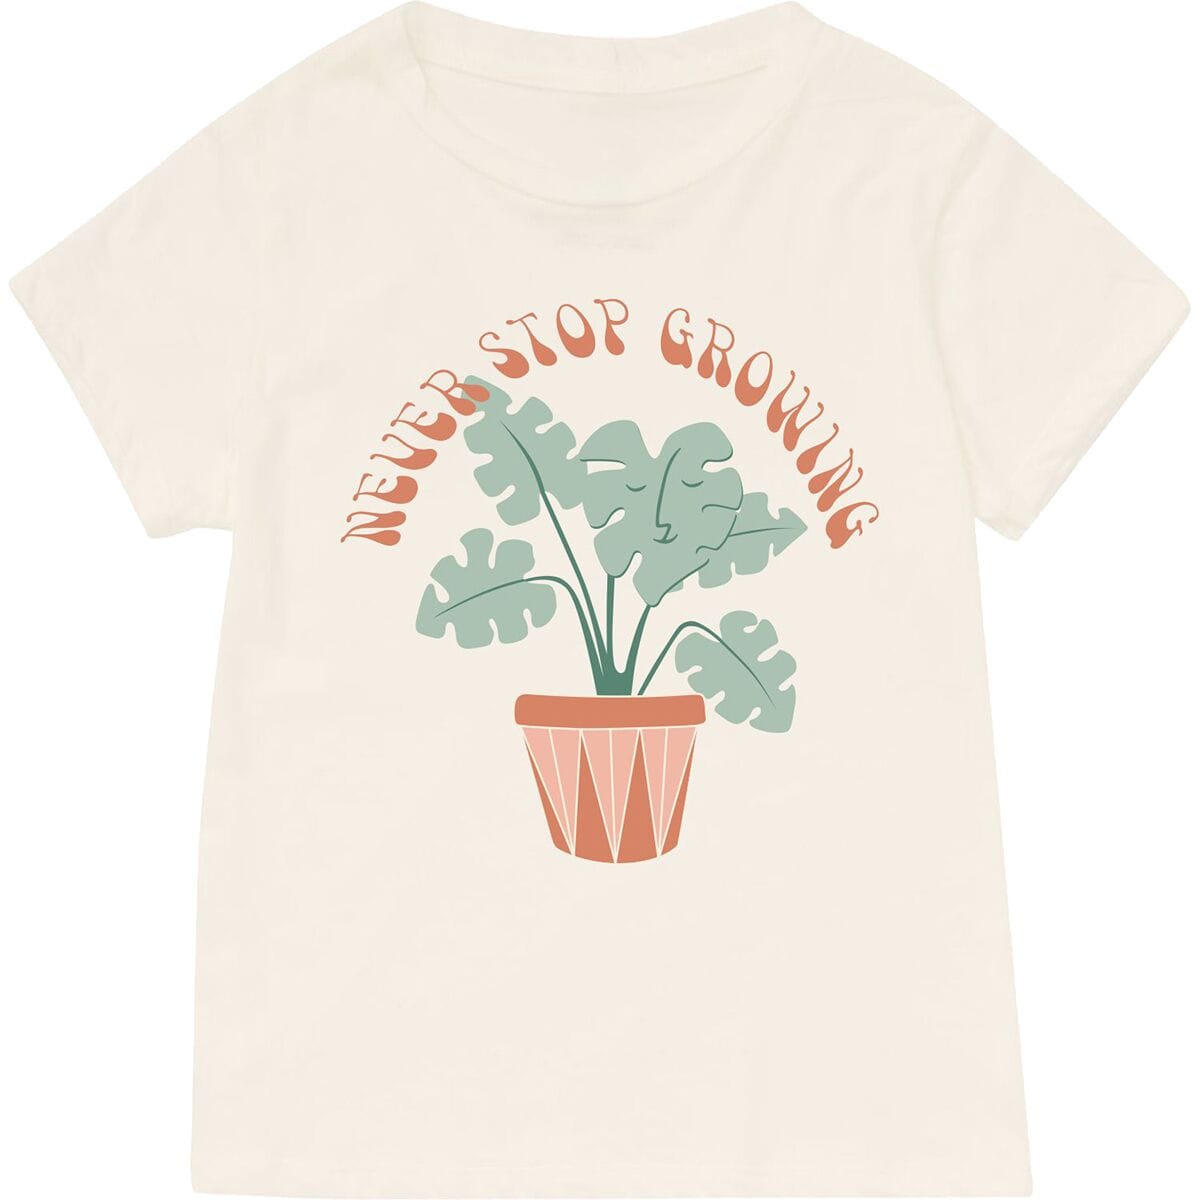 Tiny Whales Never Stop Growing T-Shirt - Kids'